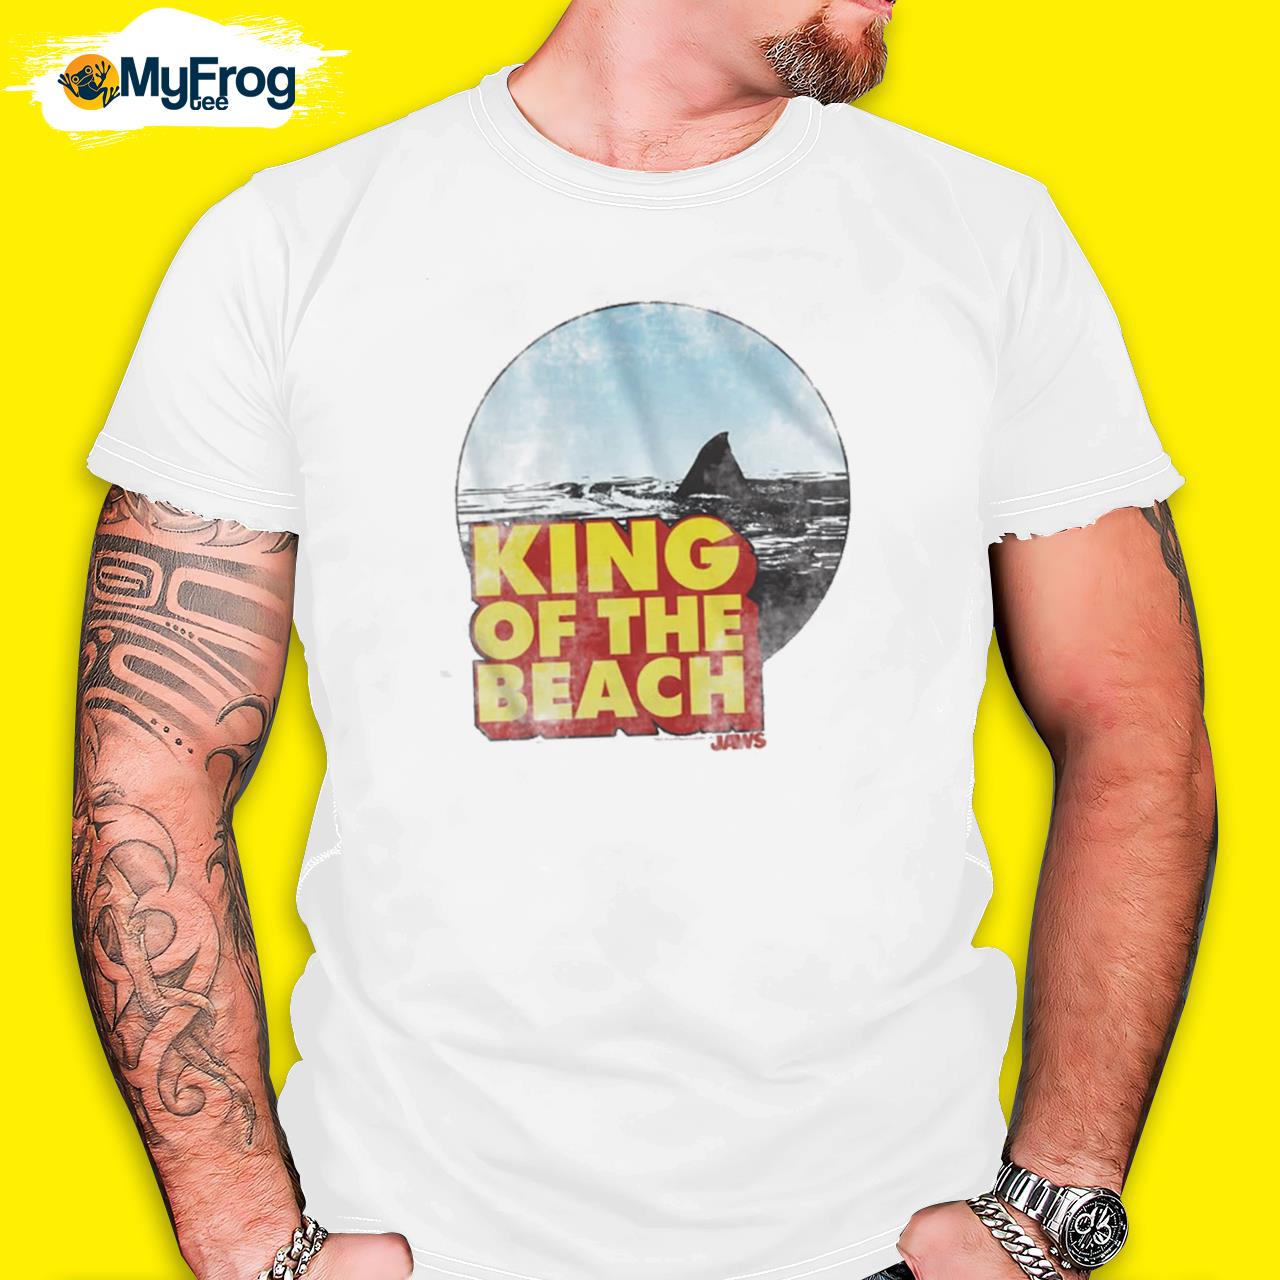 King of the beach Jaws shirt